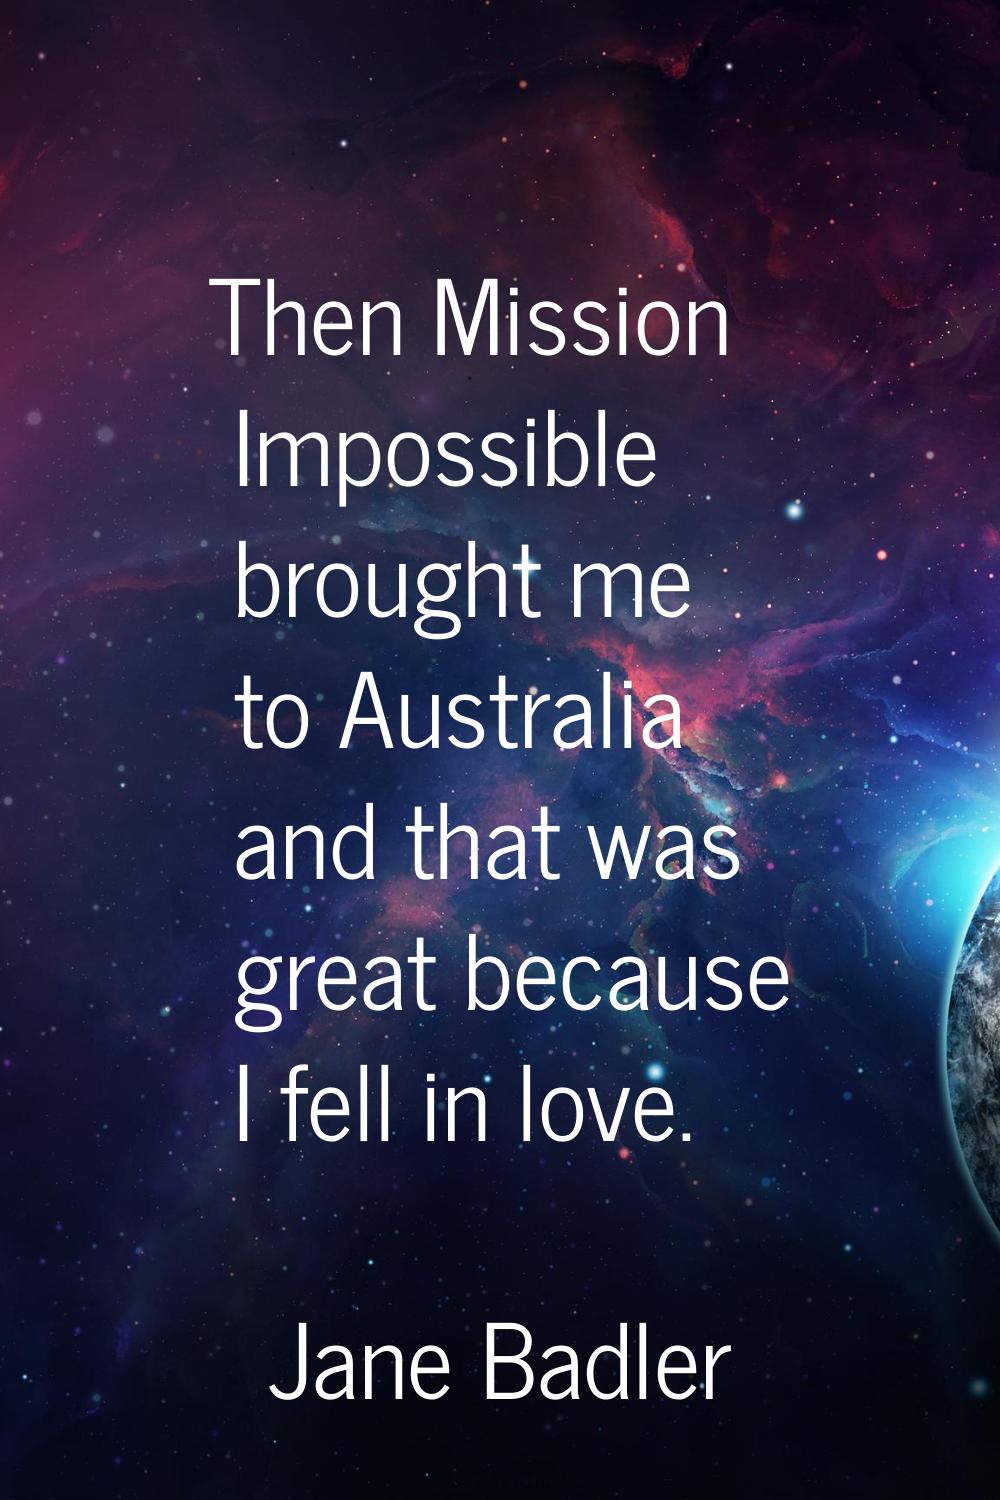 Then Mission Impossible brought me to Australia and that was great because I fell in love.